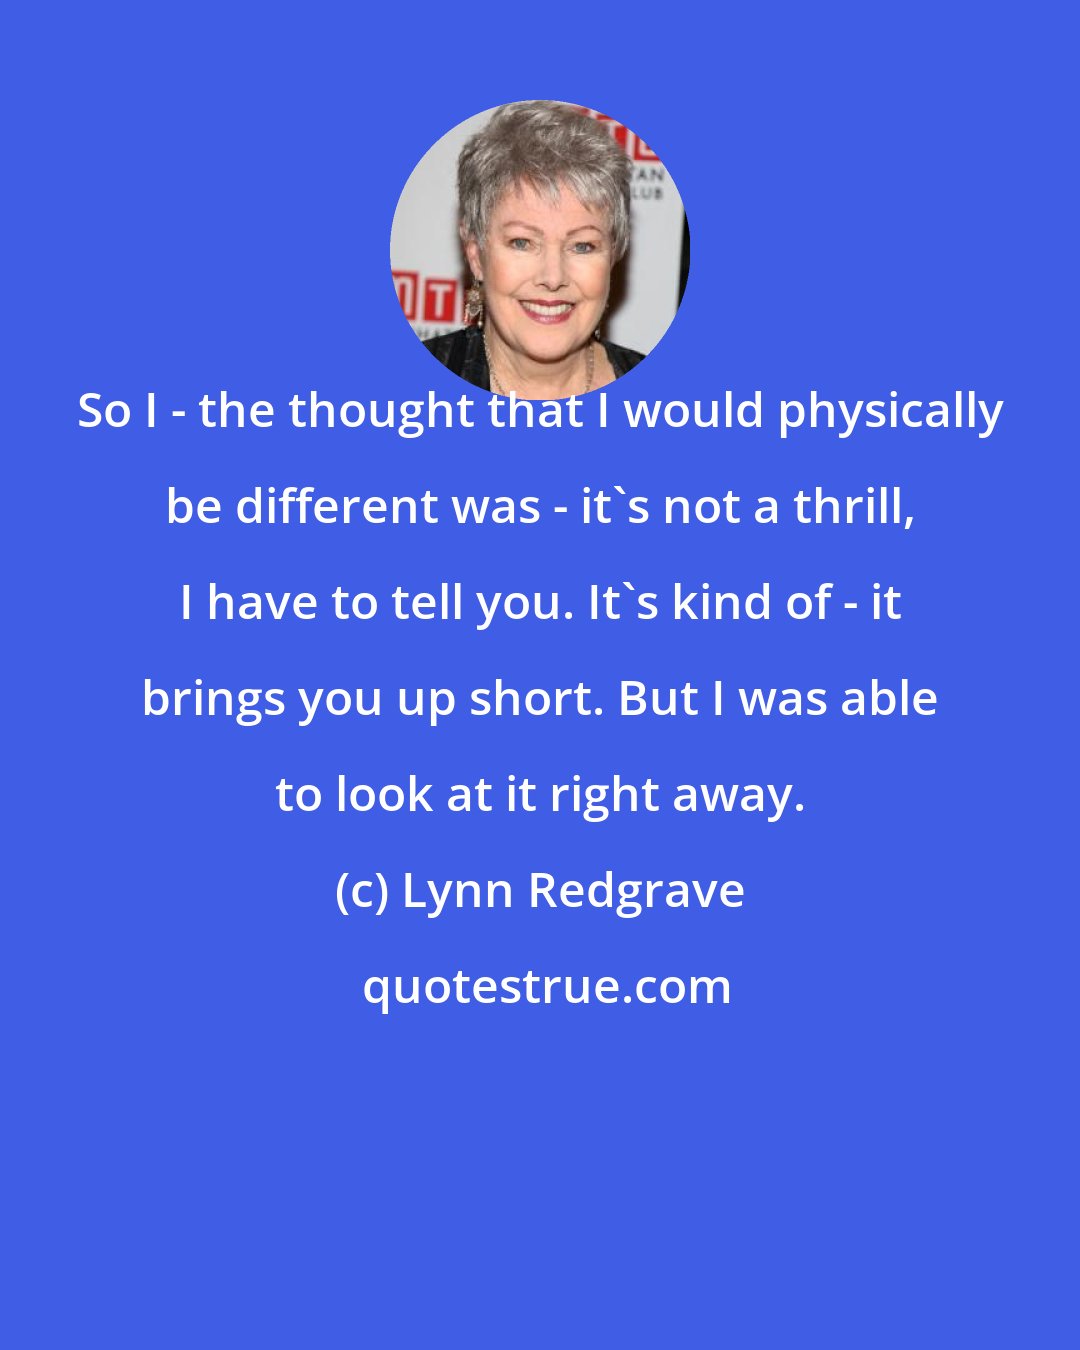 Lynn Redgrave: So I - the thought that I would physically be different was - it's not a thrill, I have to tell you. It's kind of - it brings you up short. But I was able to look at it right away.